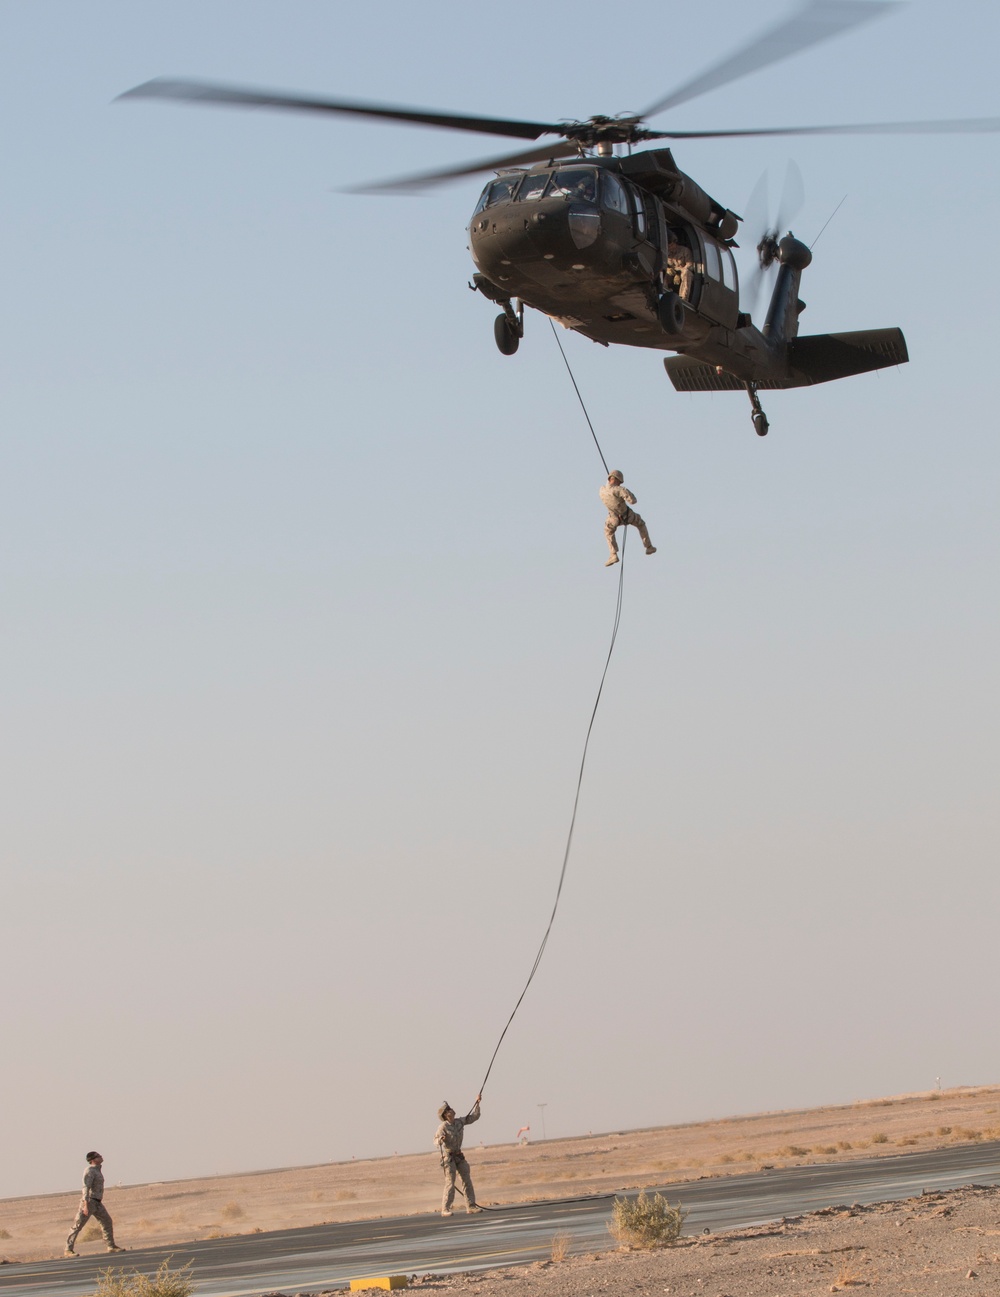 Joint rappel exercise